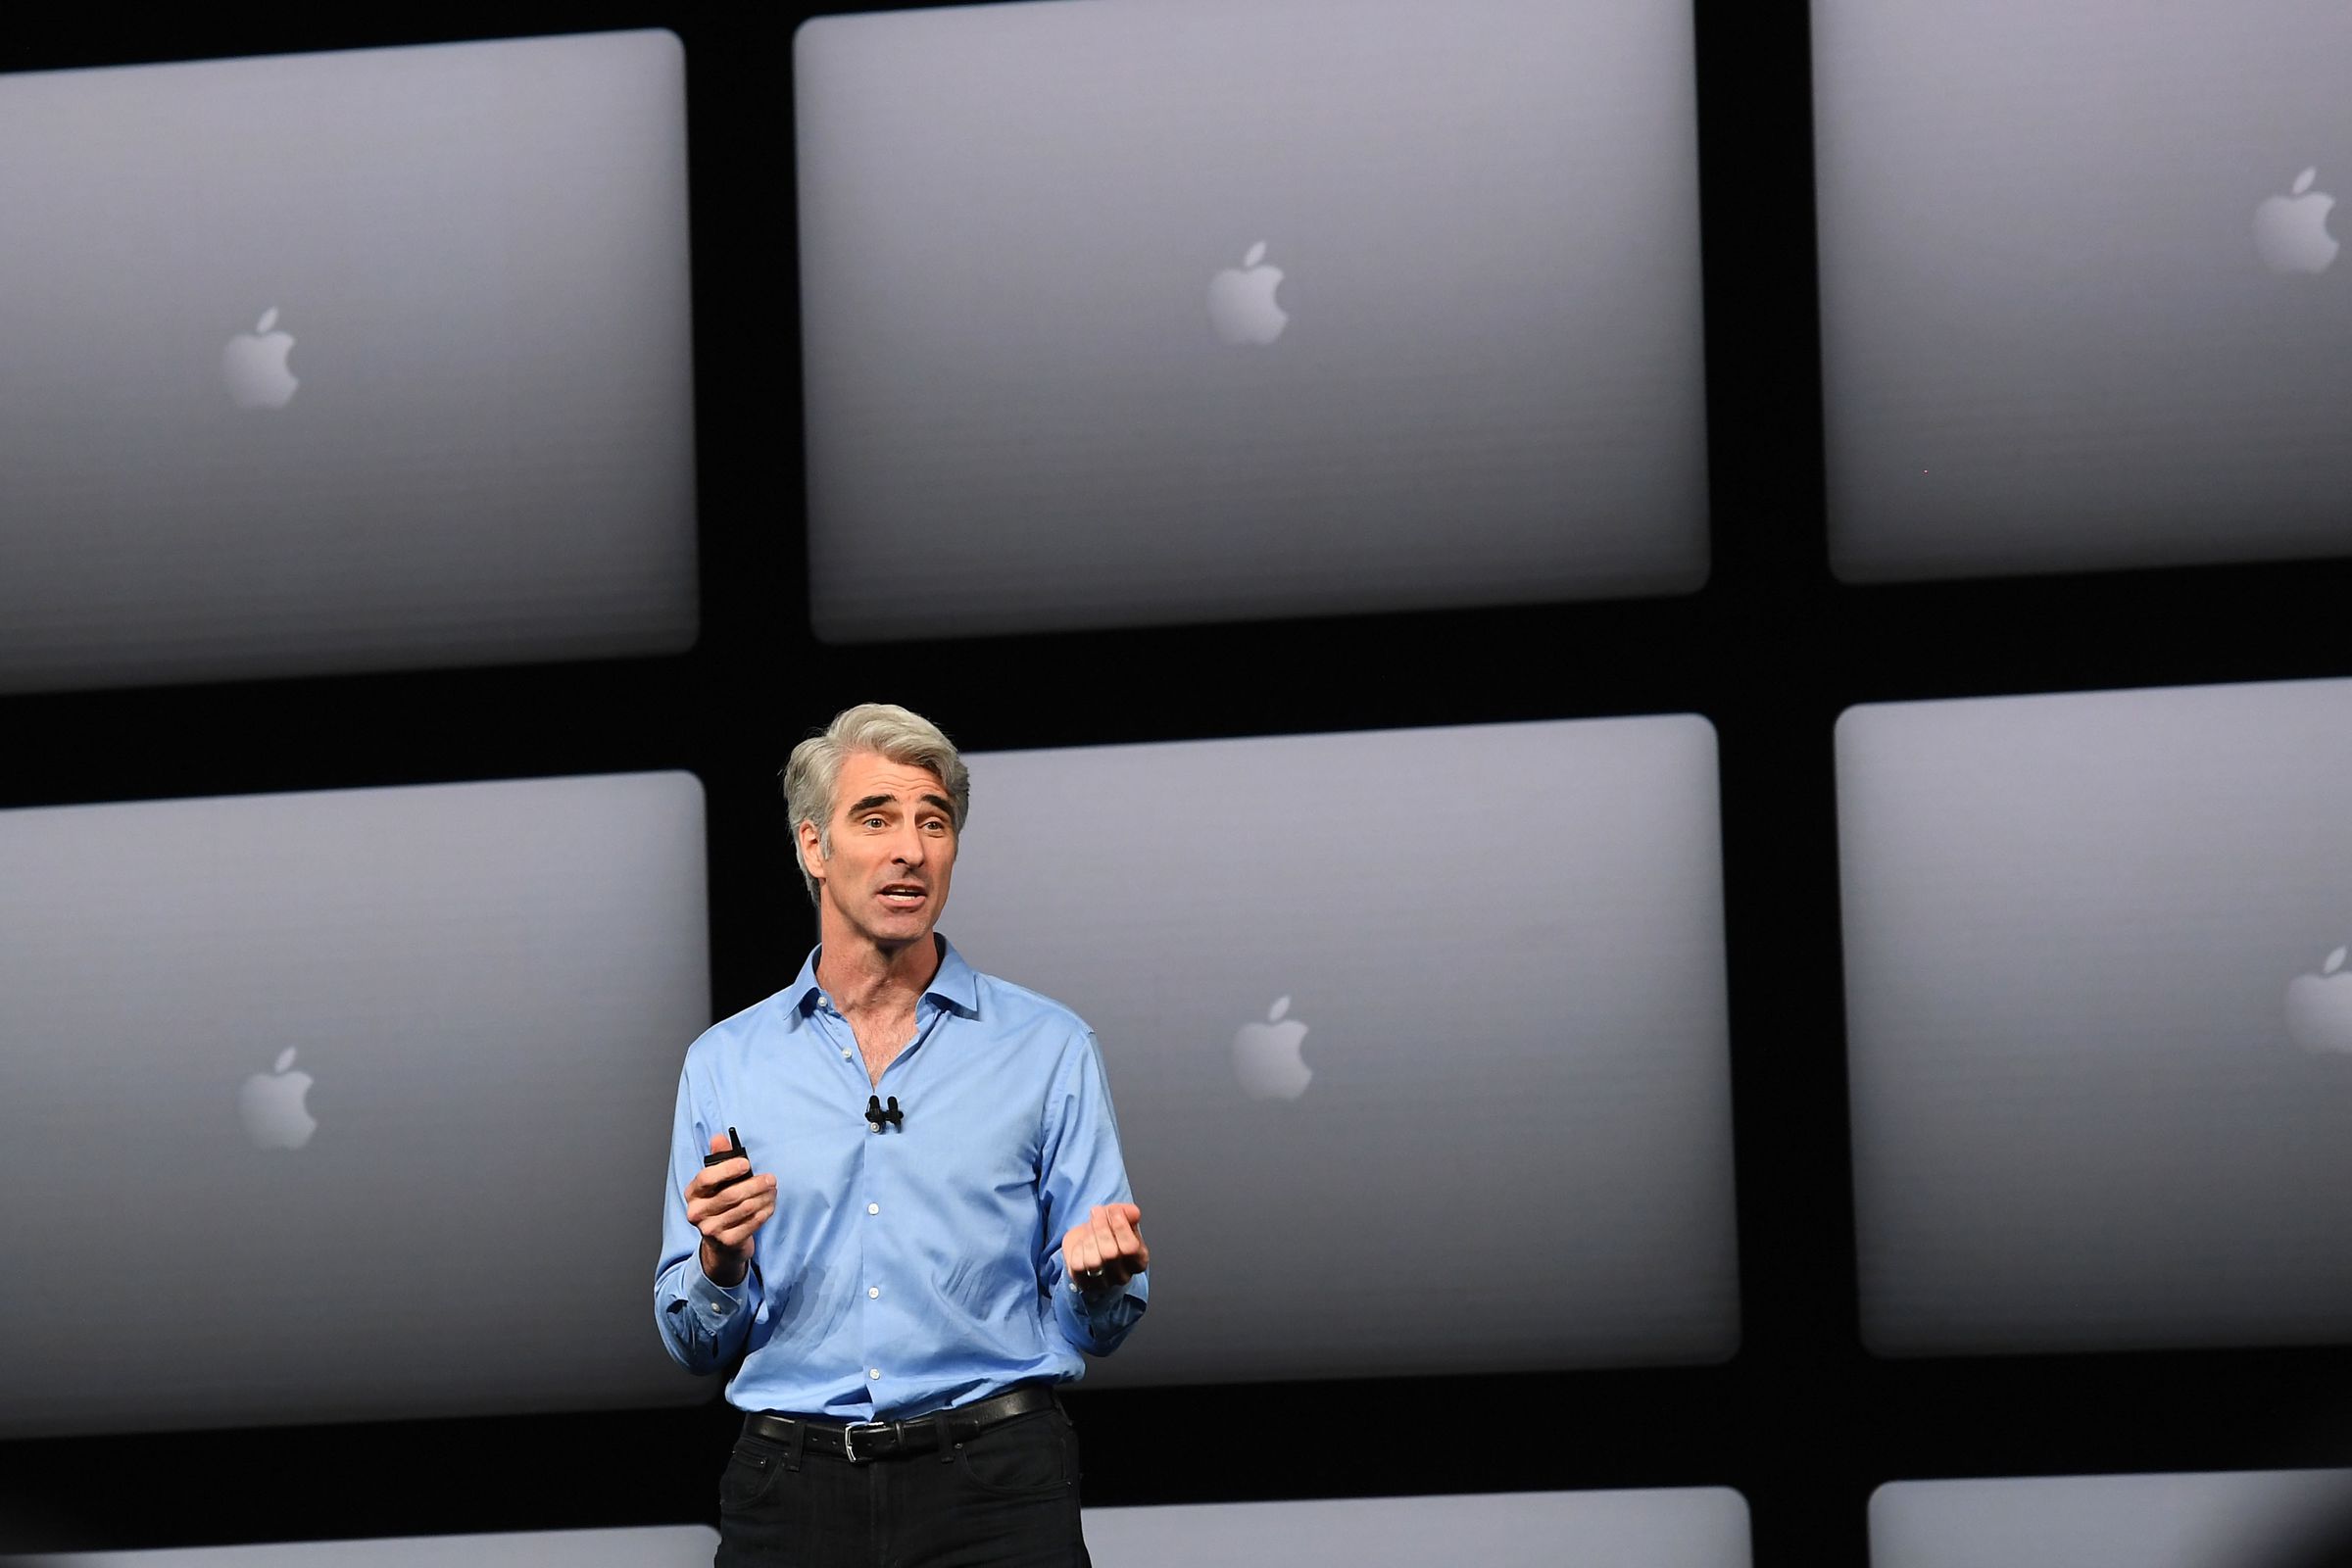 Key Speakers At The Apple Worldwide Developers Conference (WWDC)